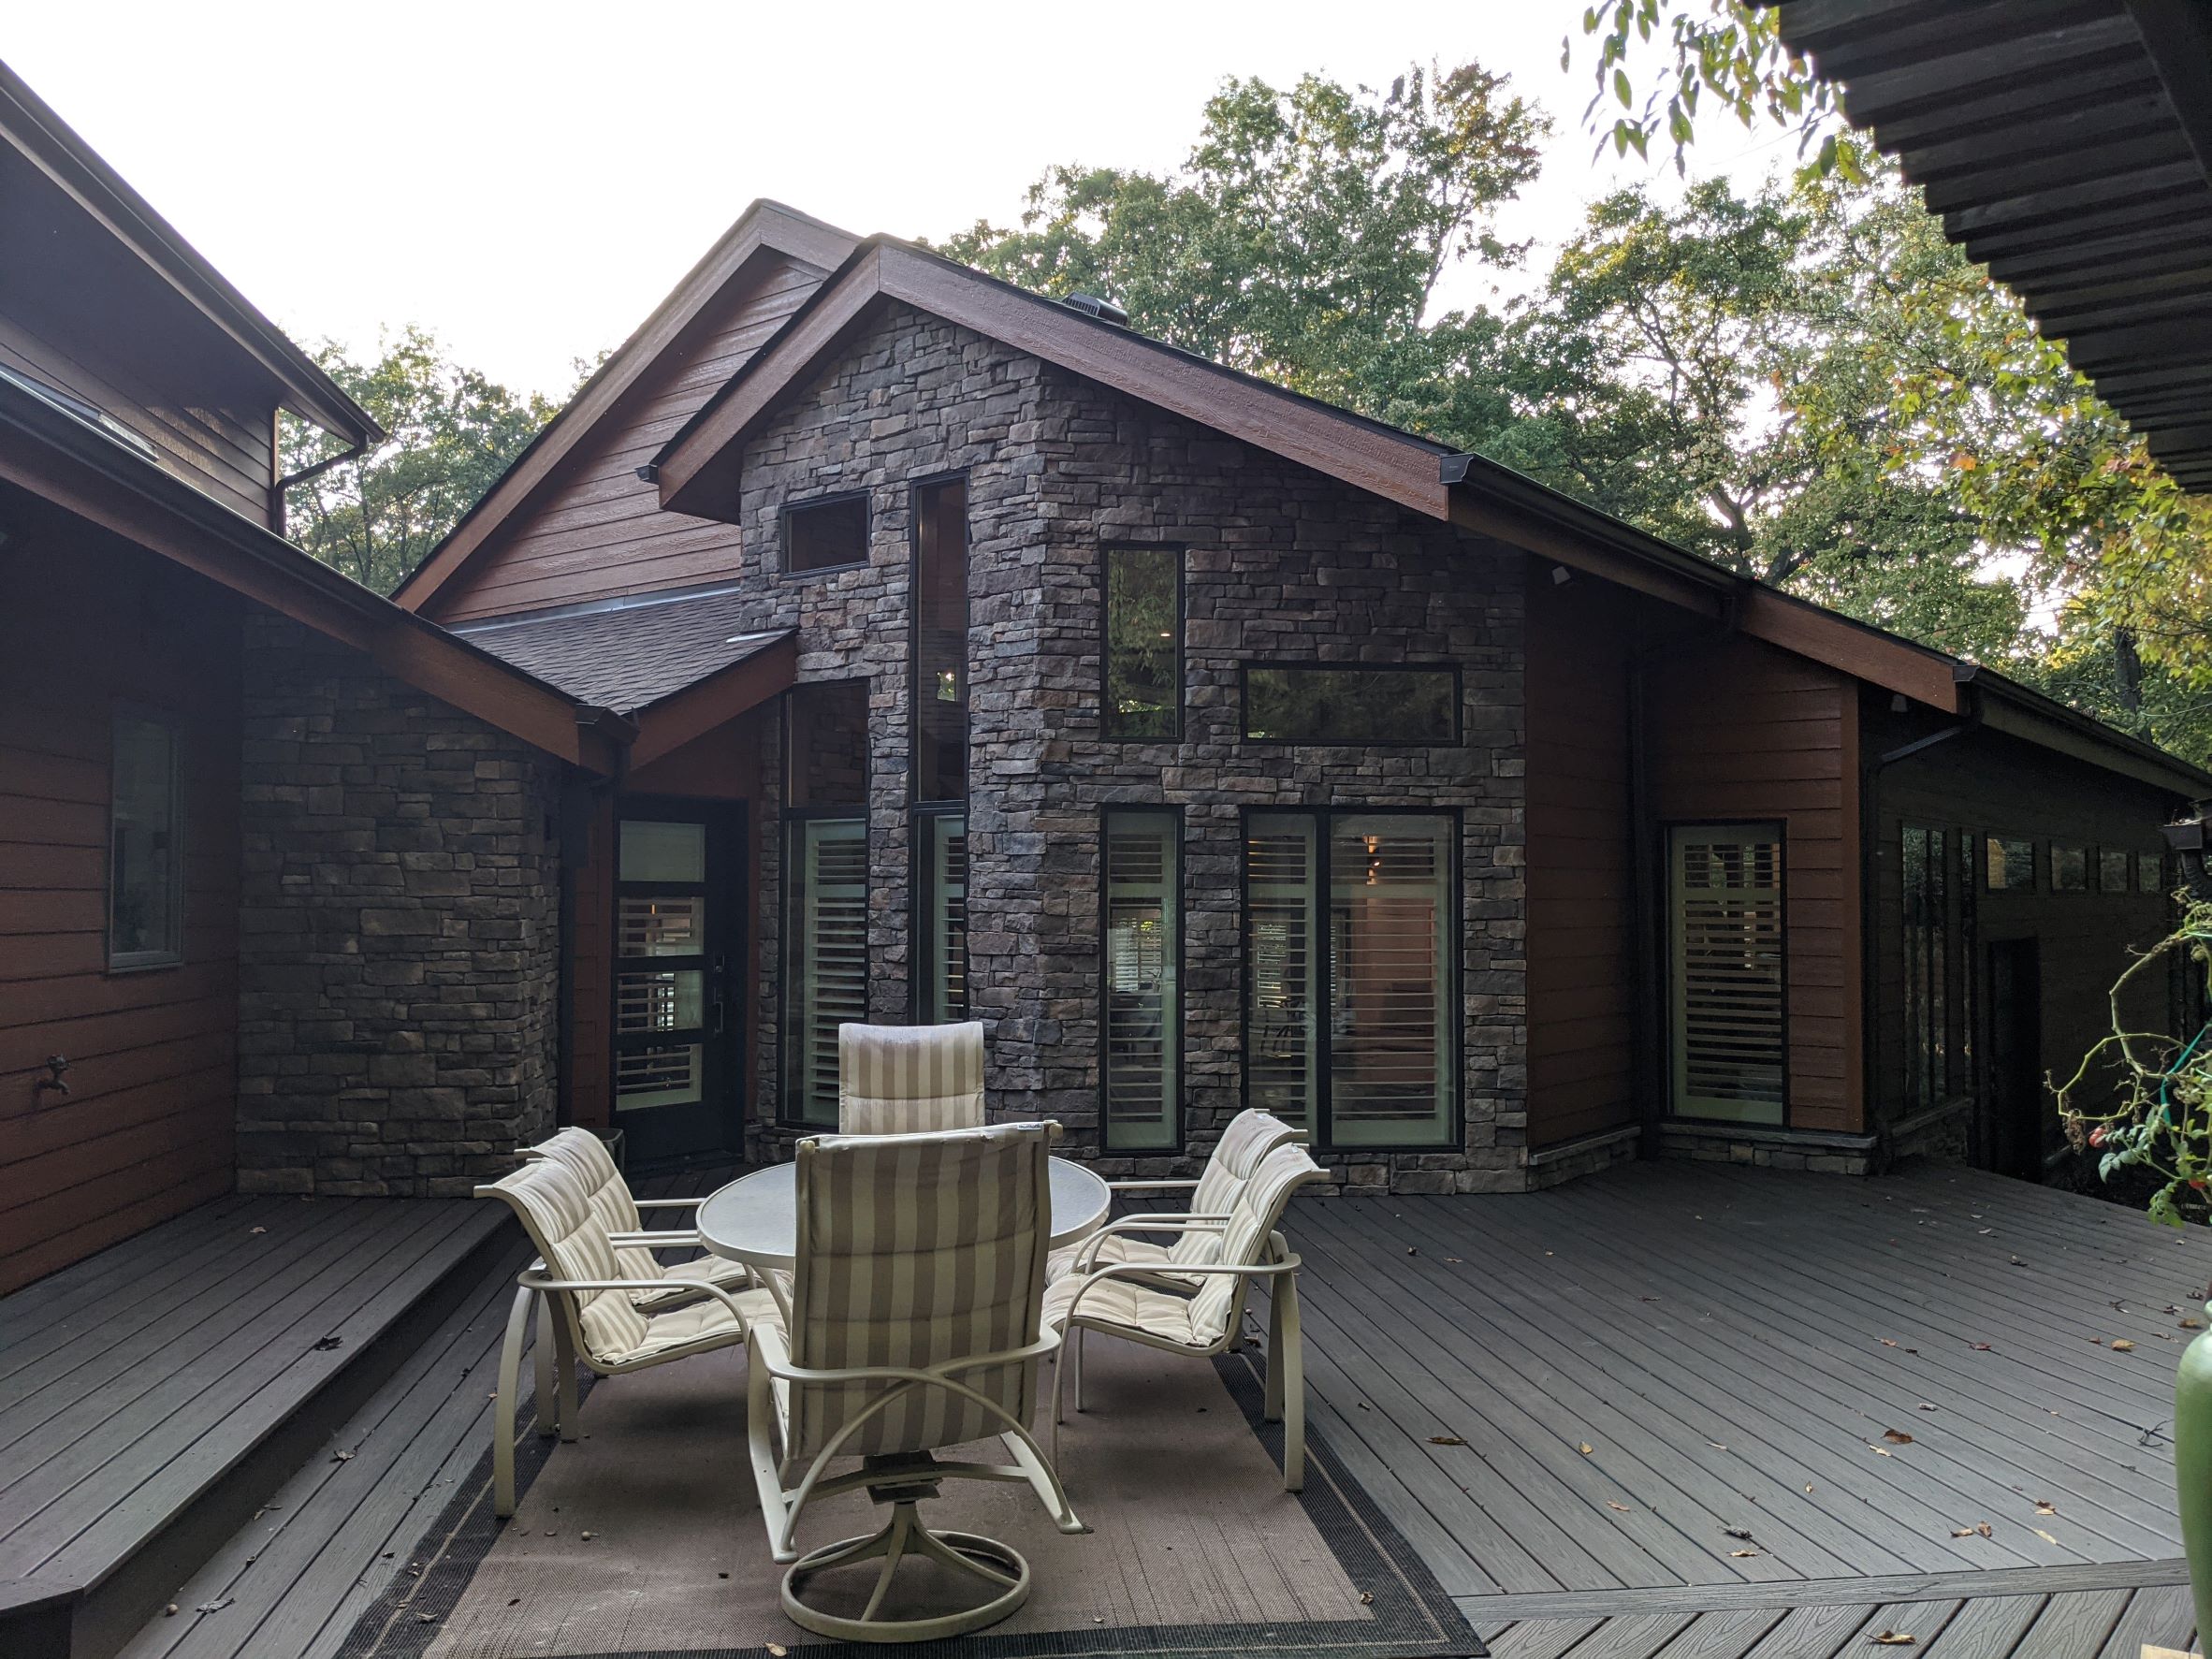 Stunning view of deck area in foreground with Contemporary House addition with stone, wood siding and modern geometric window design  outside of Pittsburgh Pennsylvania